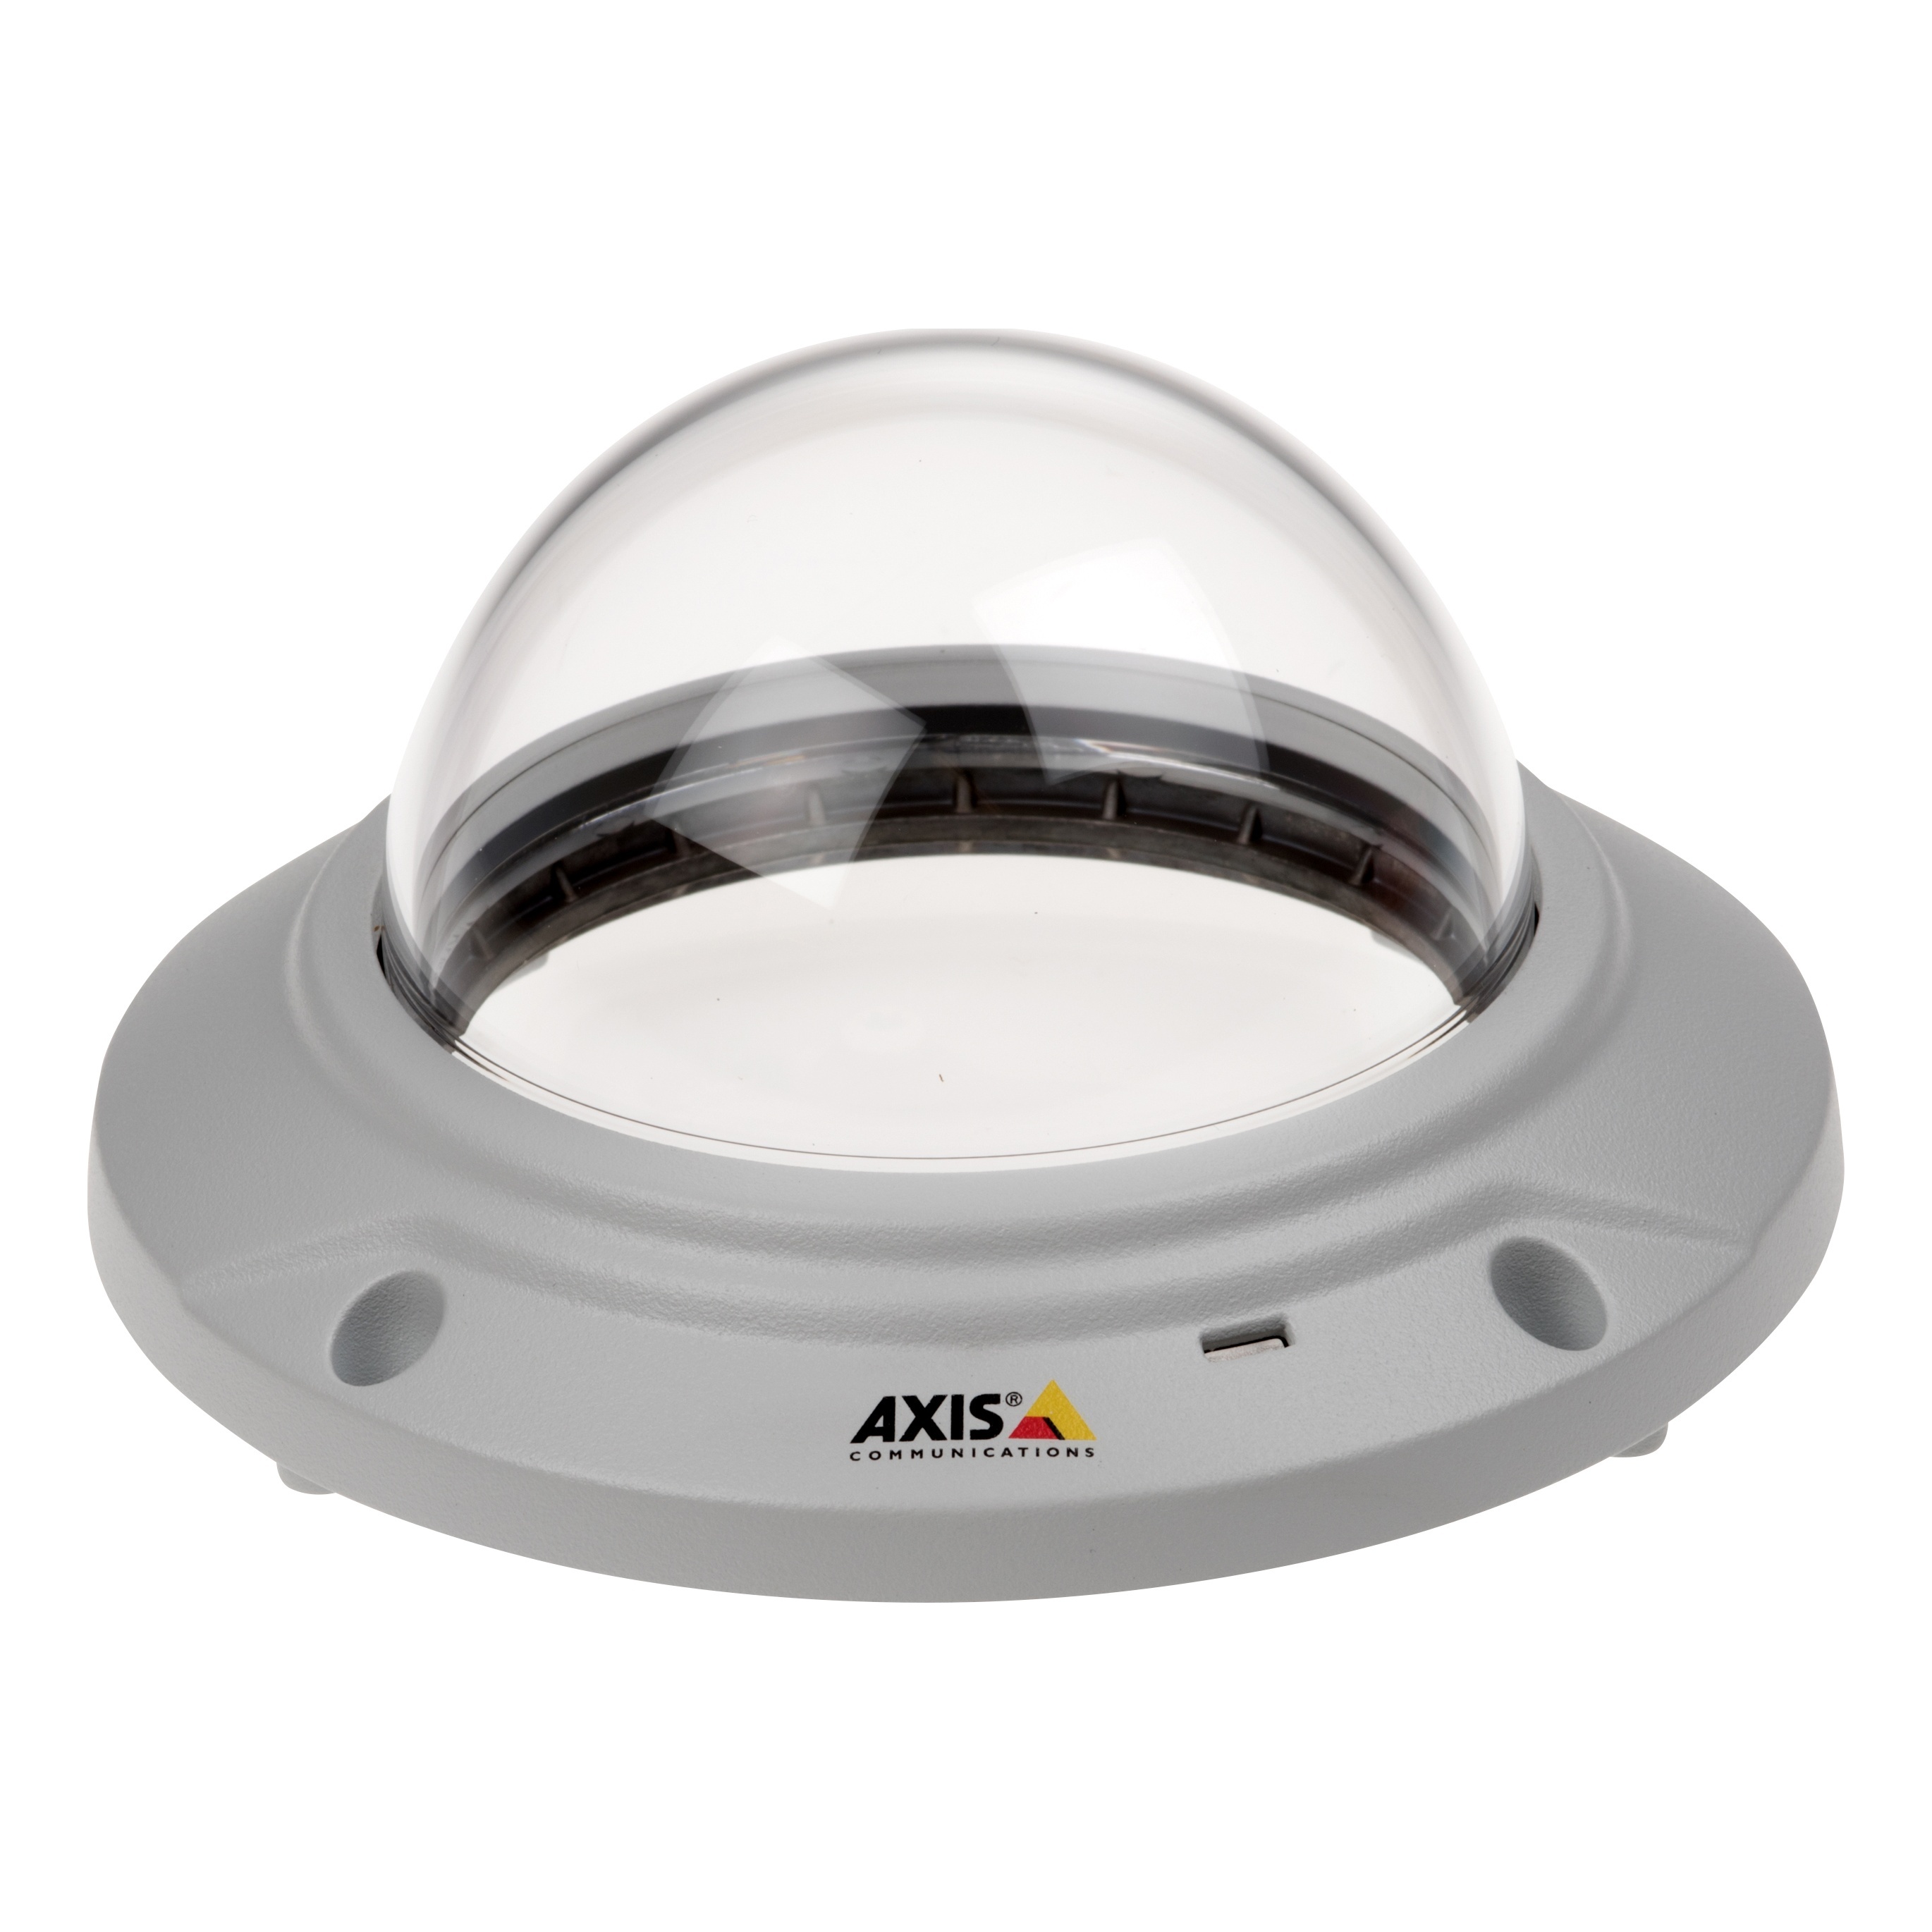 AXIS M3024-LVE IP камера